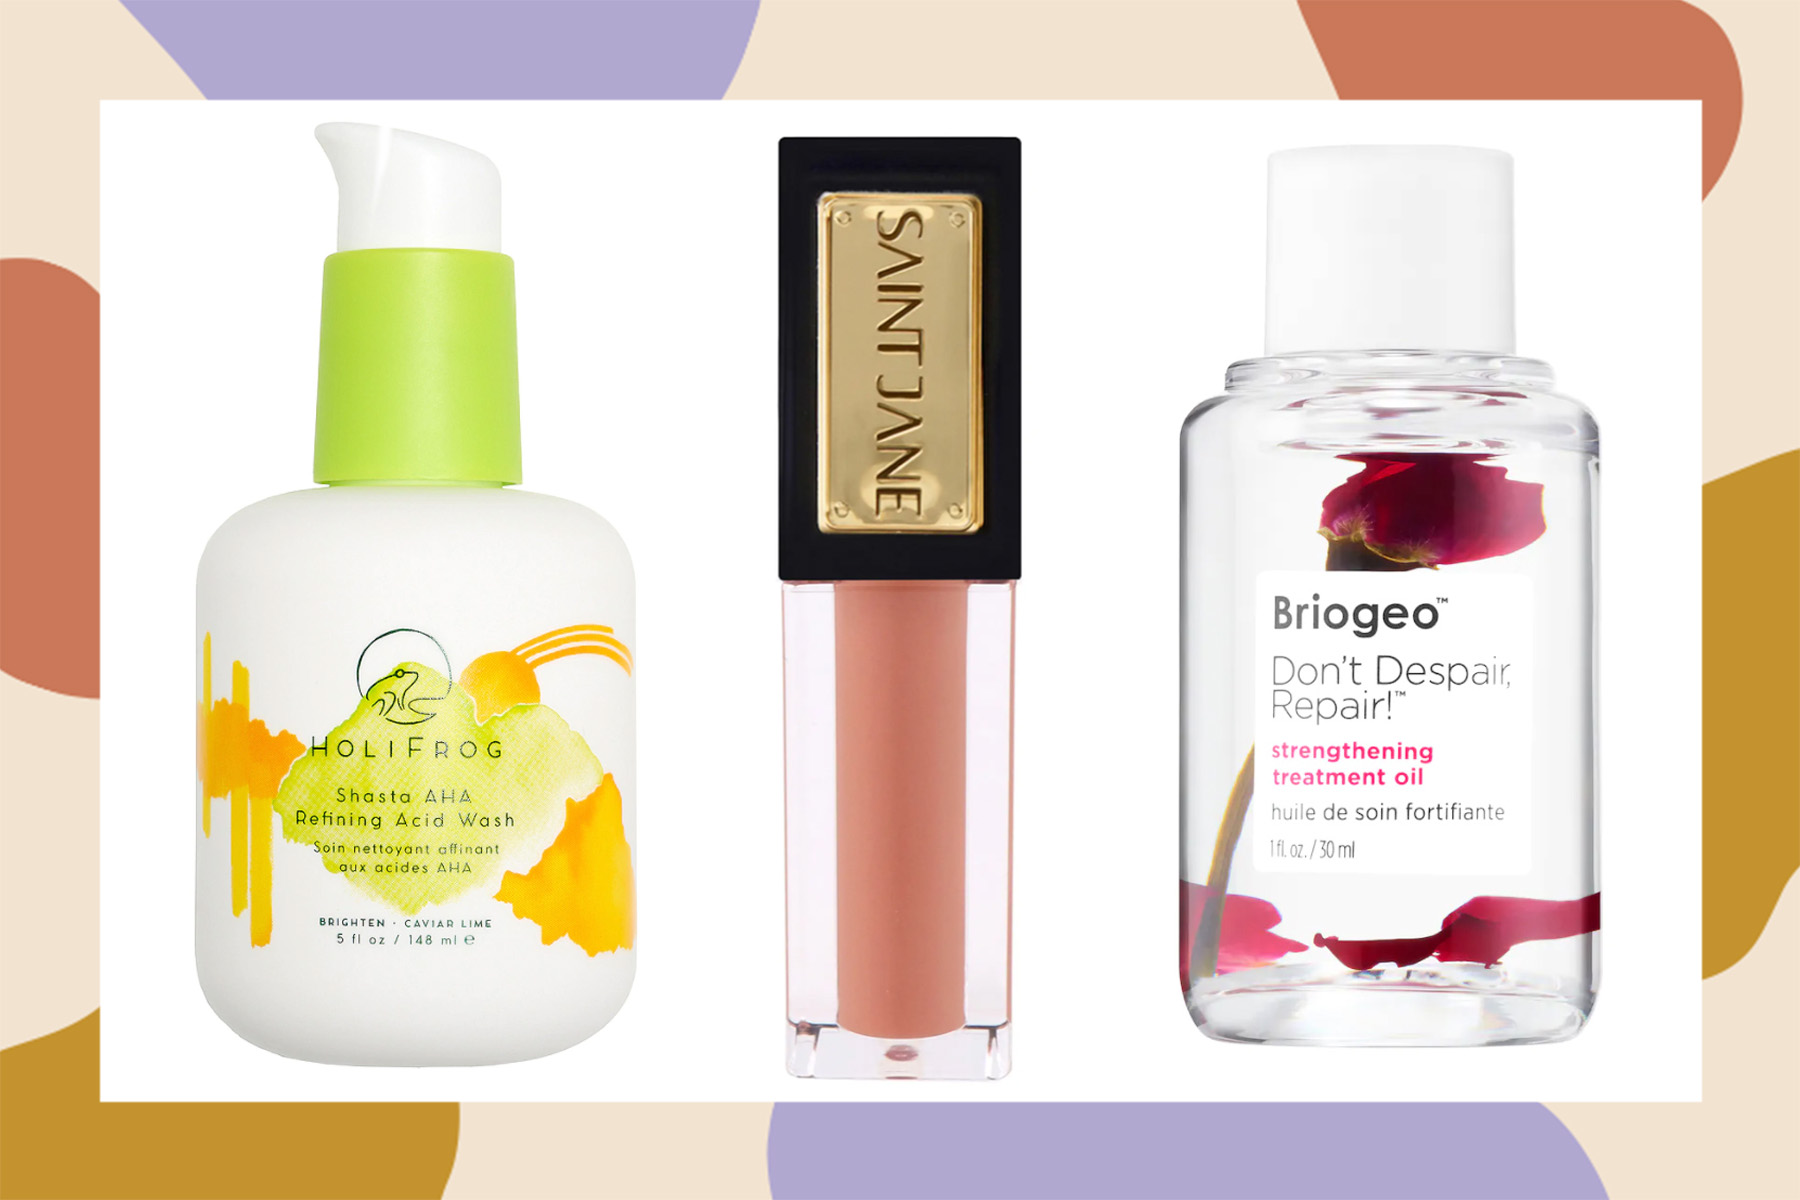 Best Clean Beauty Brands: Best Clean Skincare, Fragrance, Makeup and